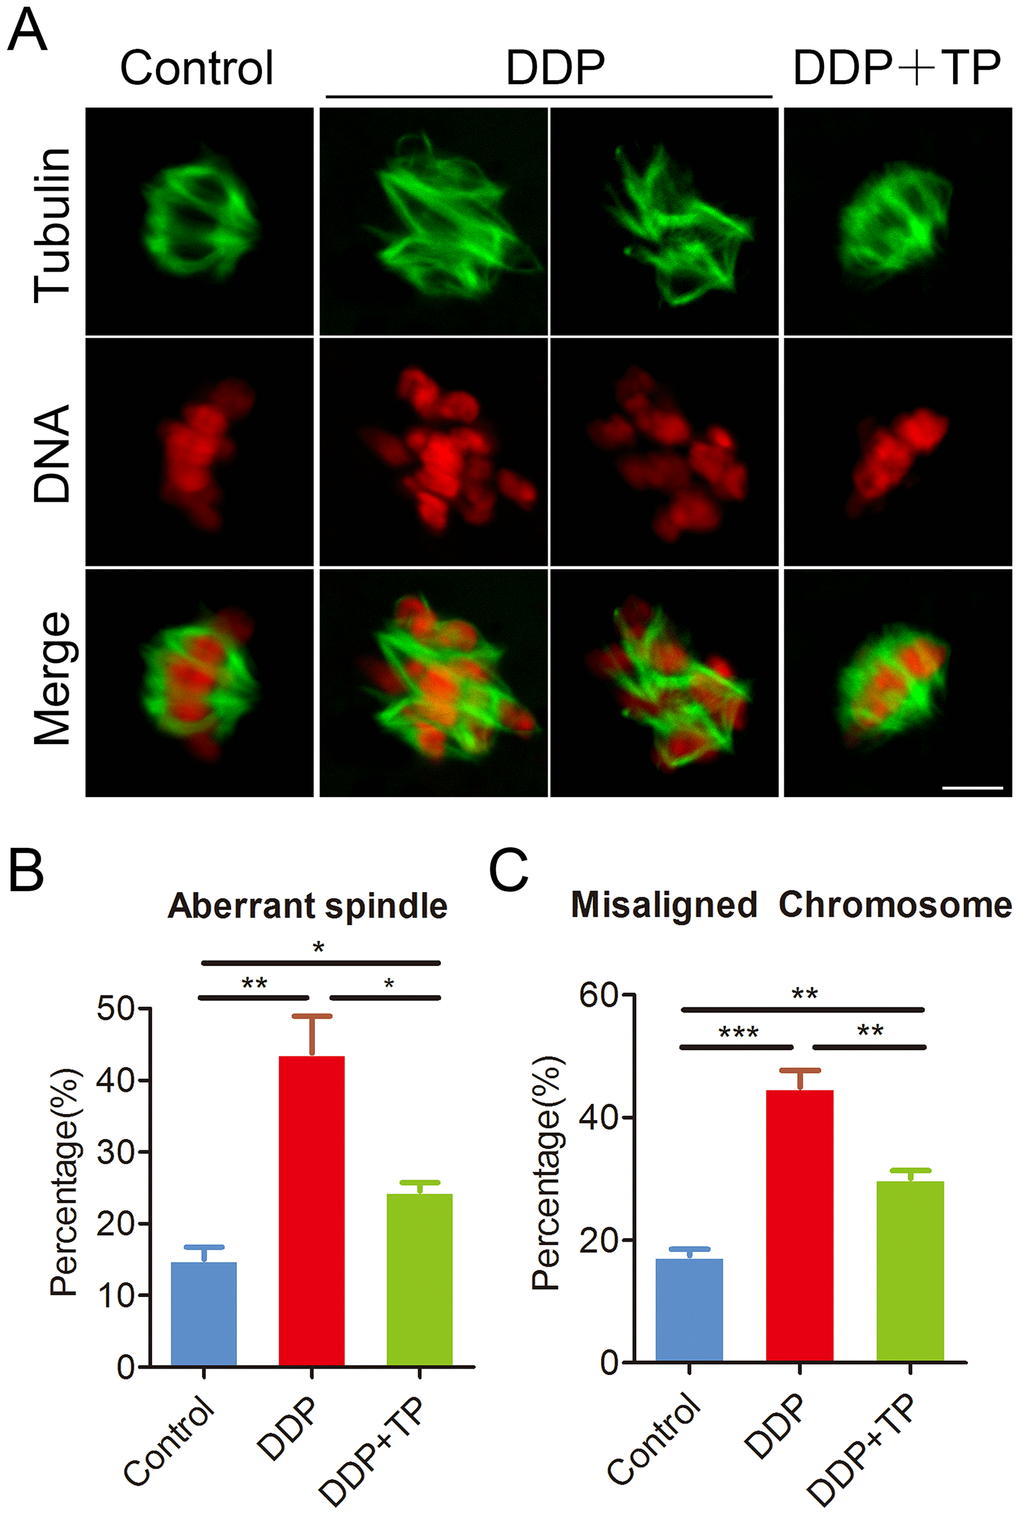 Effects of TP on the spindle/chromosome defects in DDP-exposed porcine oocytes. (A) Representative images of spindle morphologies and chromosome alignment in control, DDP-exposed and TP-supplemented oocytes. Scale bar, 5 μm. (B) The rate of aberrant spindles was recorded in control, DDP-exposed and TP-supplemented oocytes. (C) The rate of misaligned chromosomes was recorded in control, DDP-exposed and TP-supplemented oocytes. Data in were presented as mean percentage (mean ± SEM) of at least three independent experiments. *P 